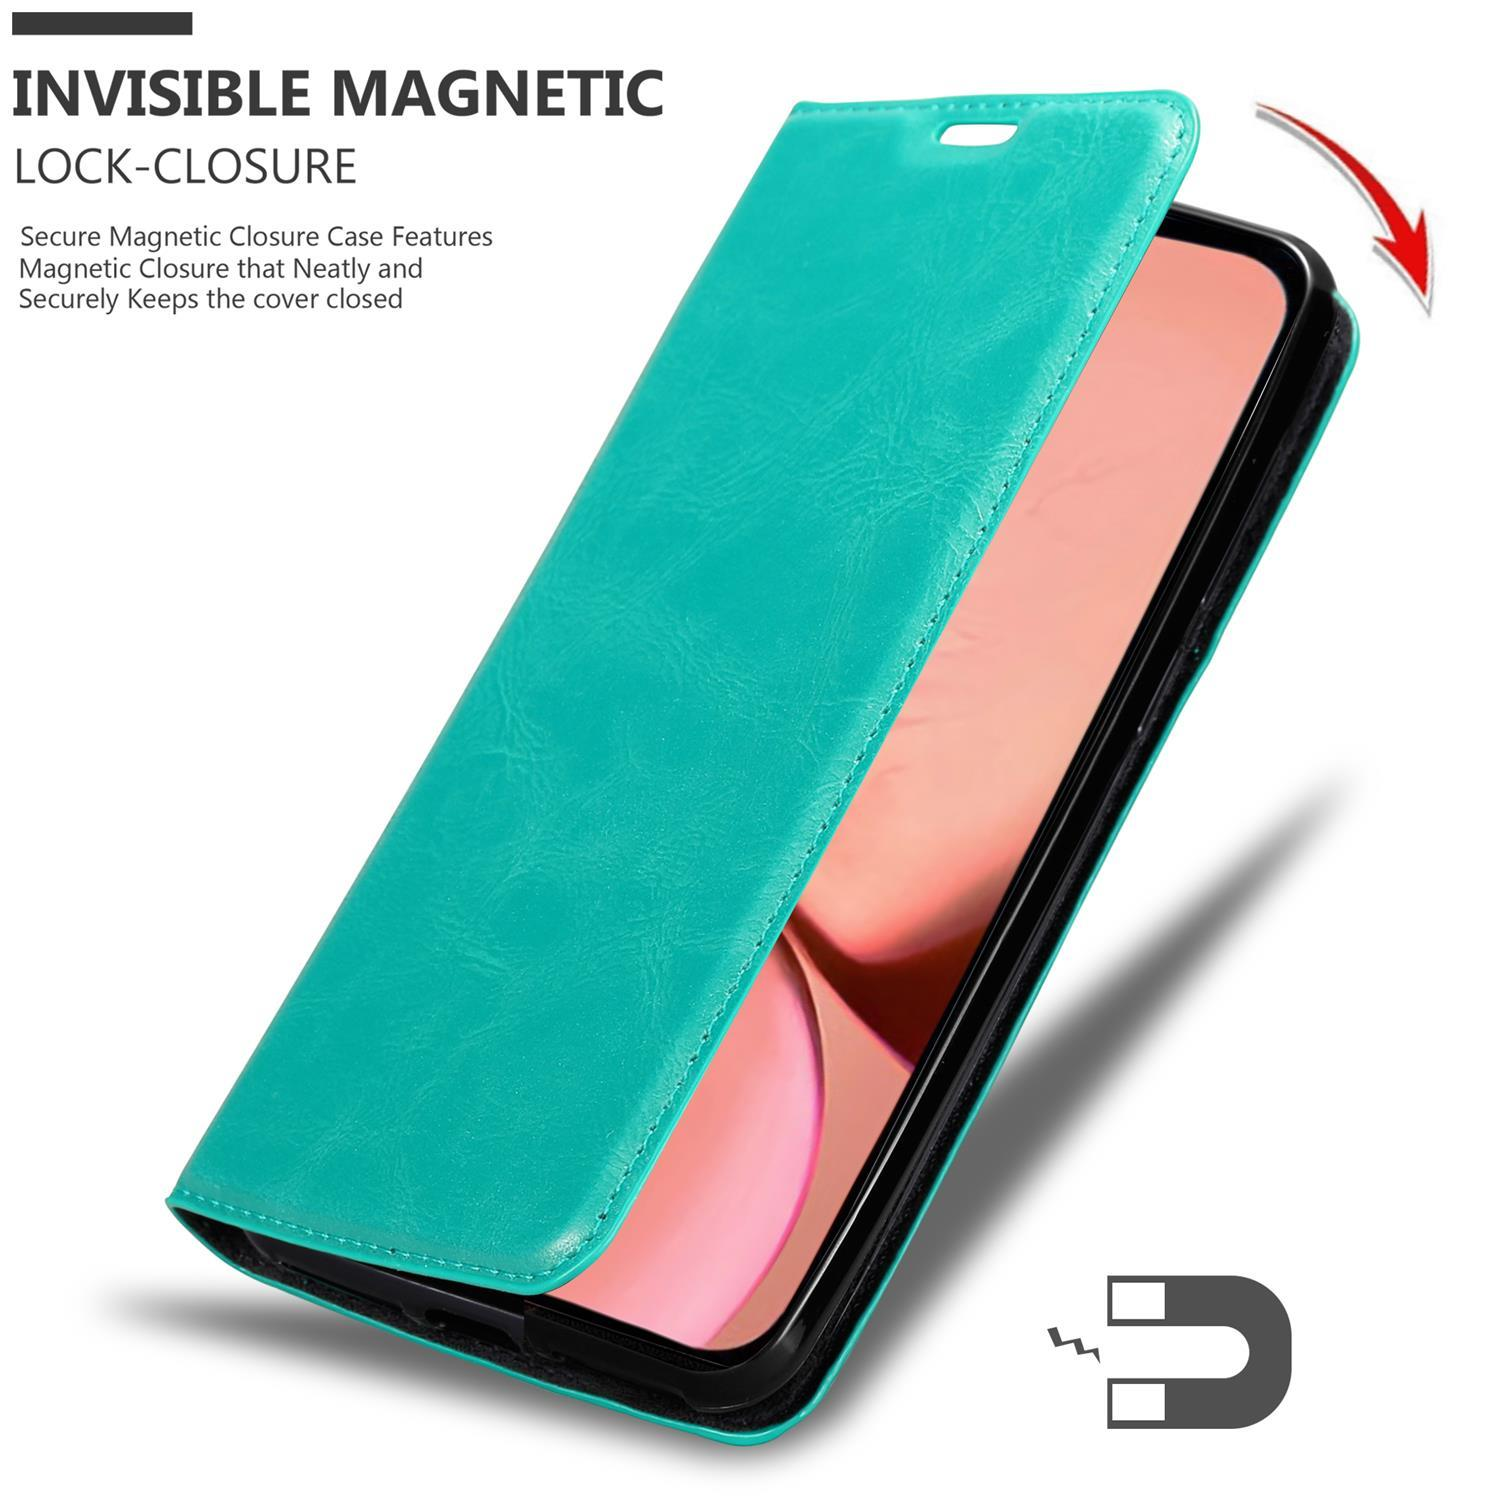 Apple, Hülle 13, Bookcover, Book Invisible Magnet, PETROL iPhone CADORABO TÜRKIS